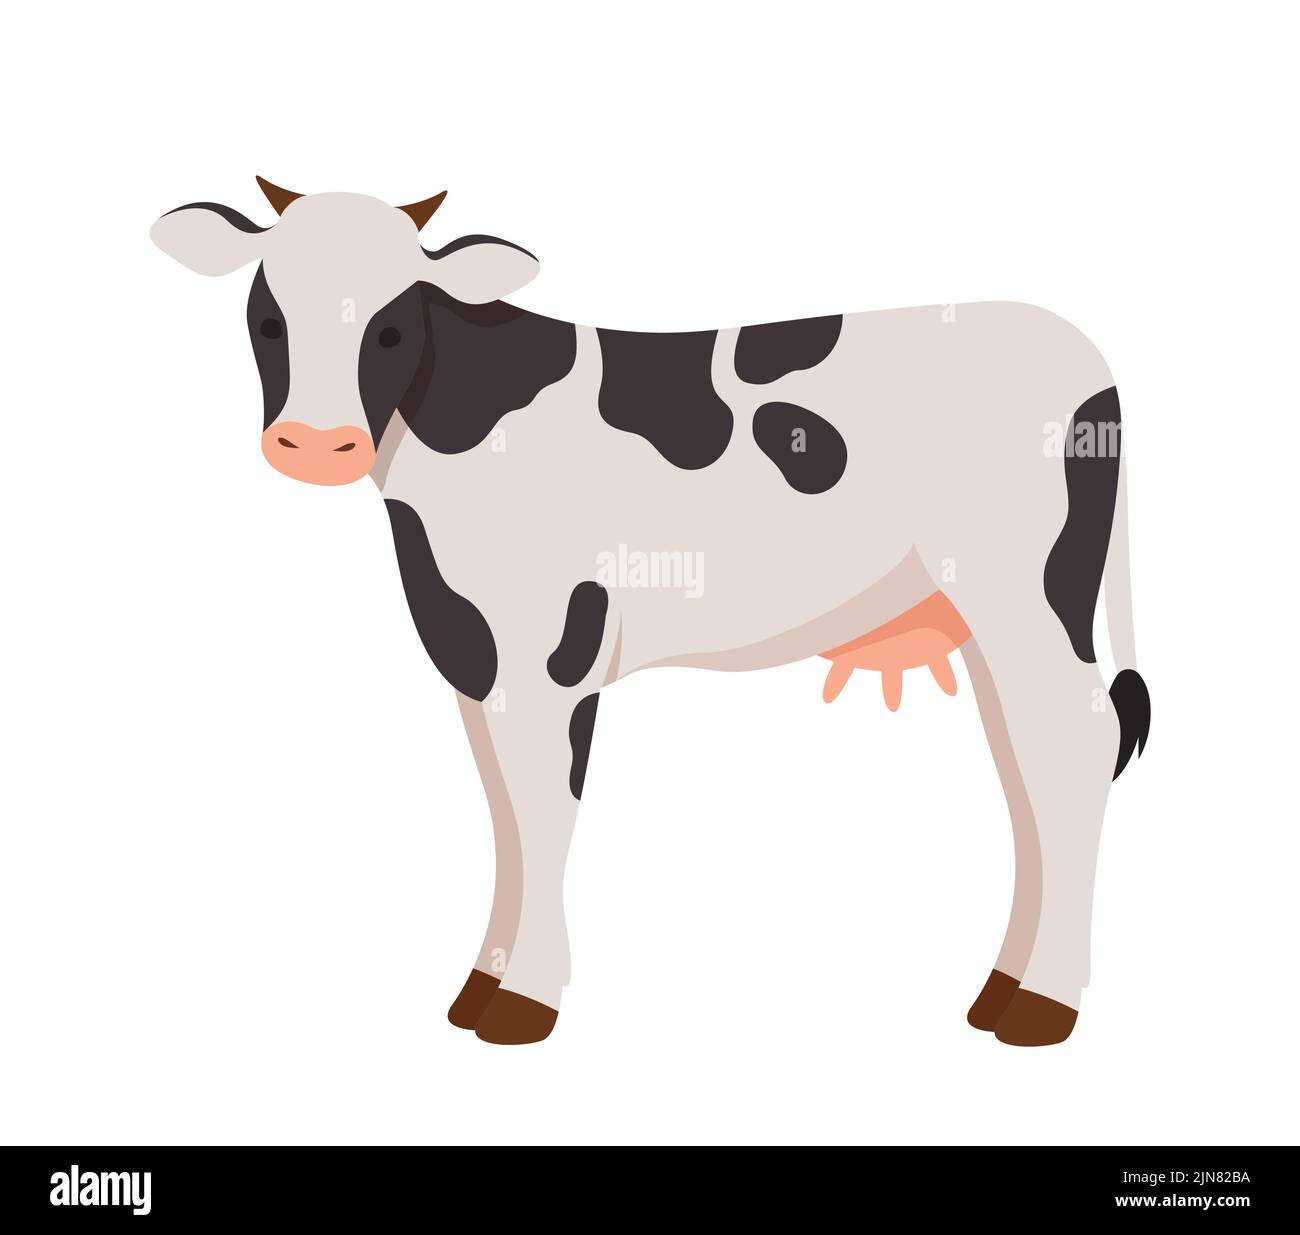 Seamless Pattern With Cute Cow Print For Baby Vector Print With Baby Cow  Stock Illustration - Download Image Now - iStock